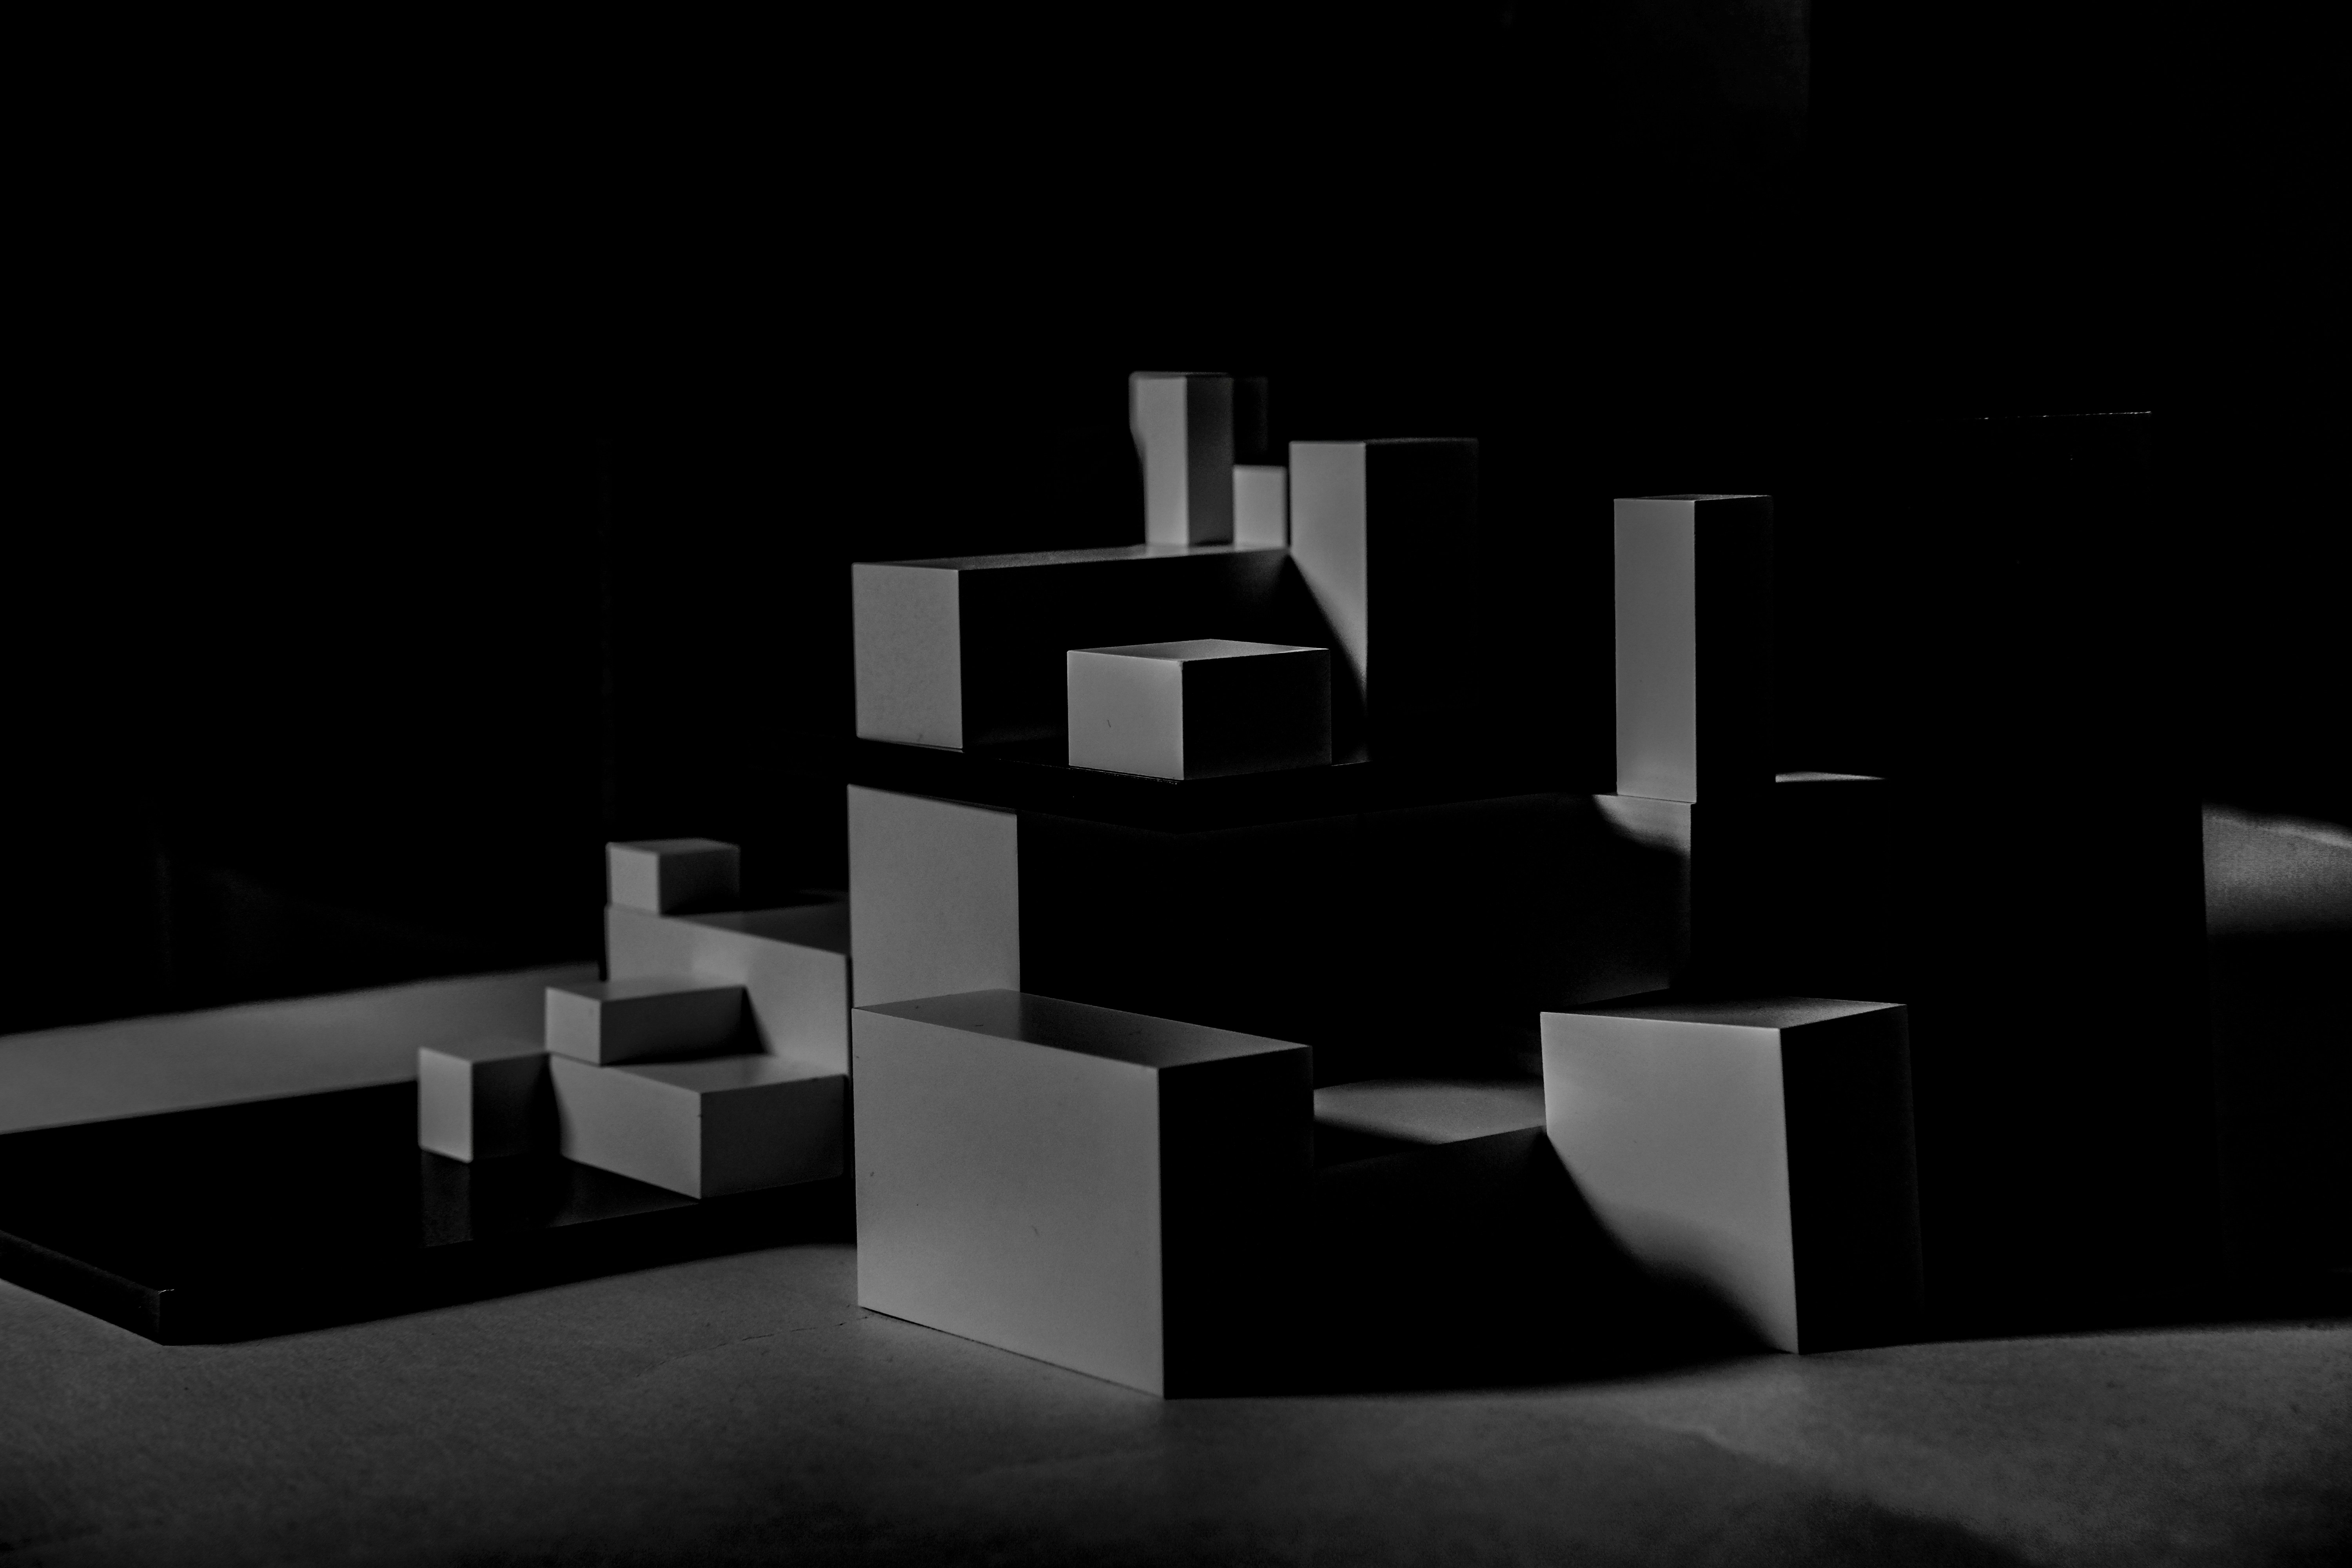 Abstract architectural structure illuminated with dramatic lighting, demonstrating principles of structural pattern matching in a Python programming context.